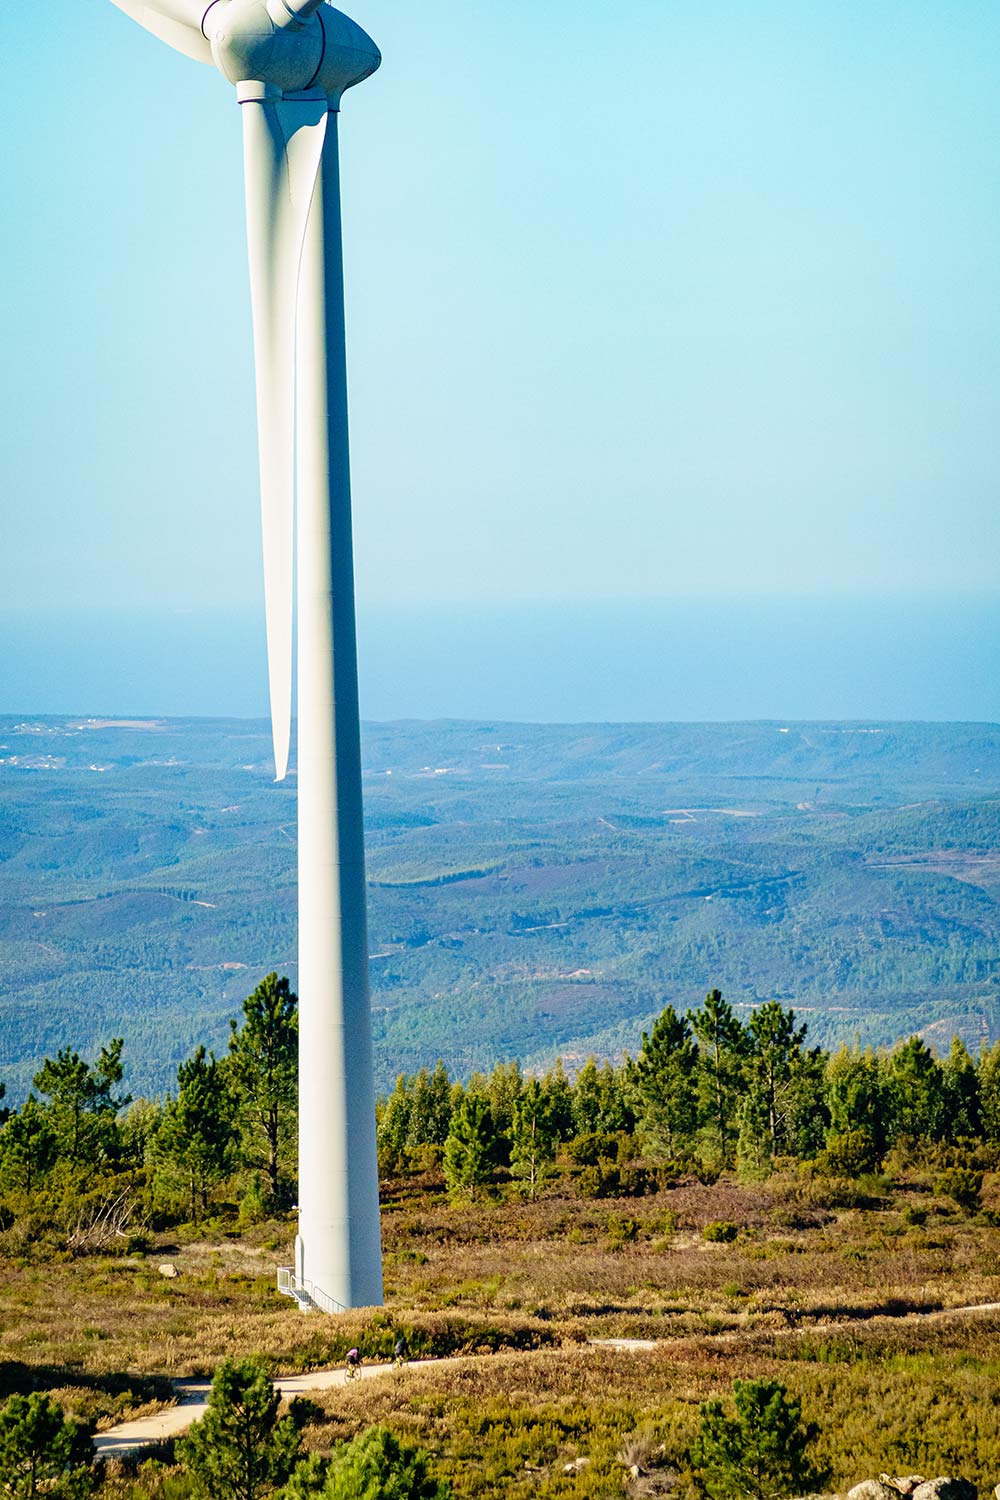 seeing windmills in the forest on thomson gravel bike tour in portugal